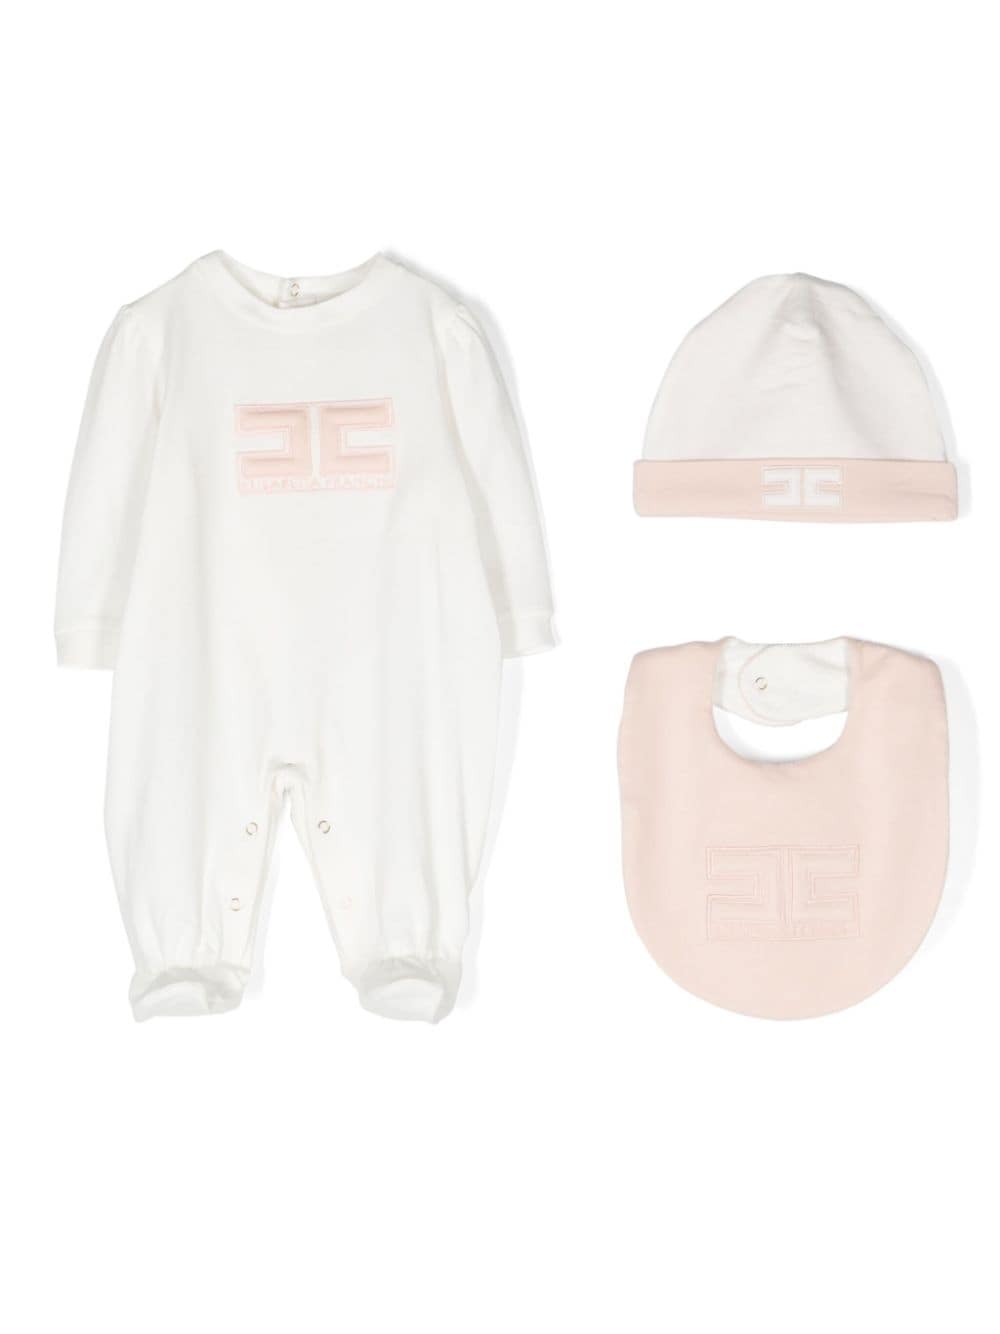 White baby girl onesie set with pink logo